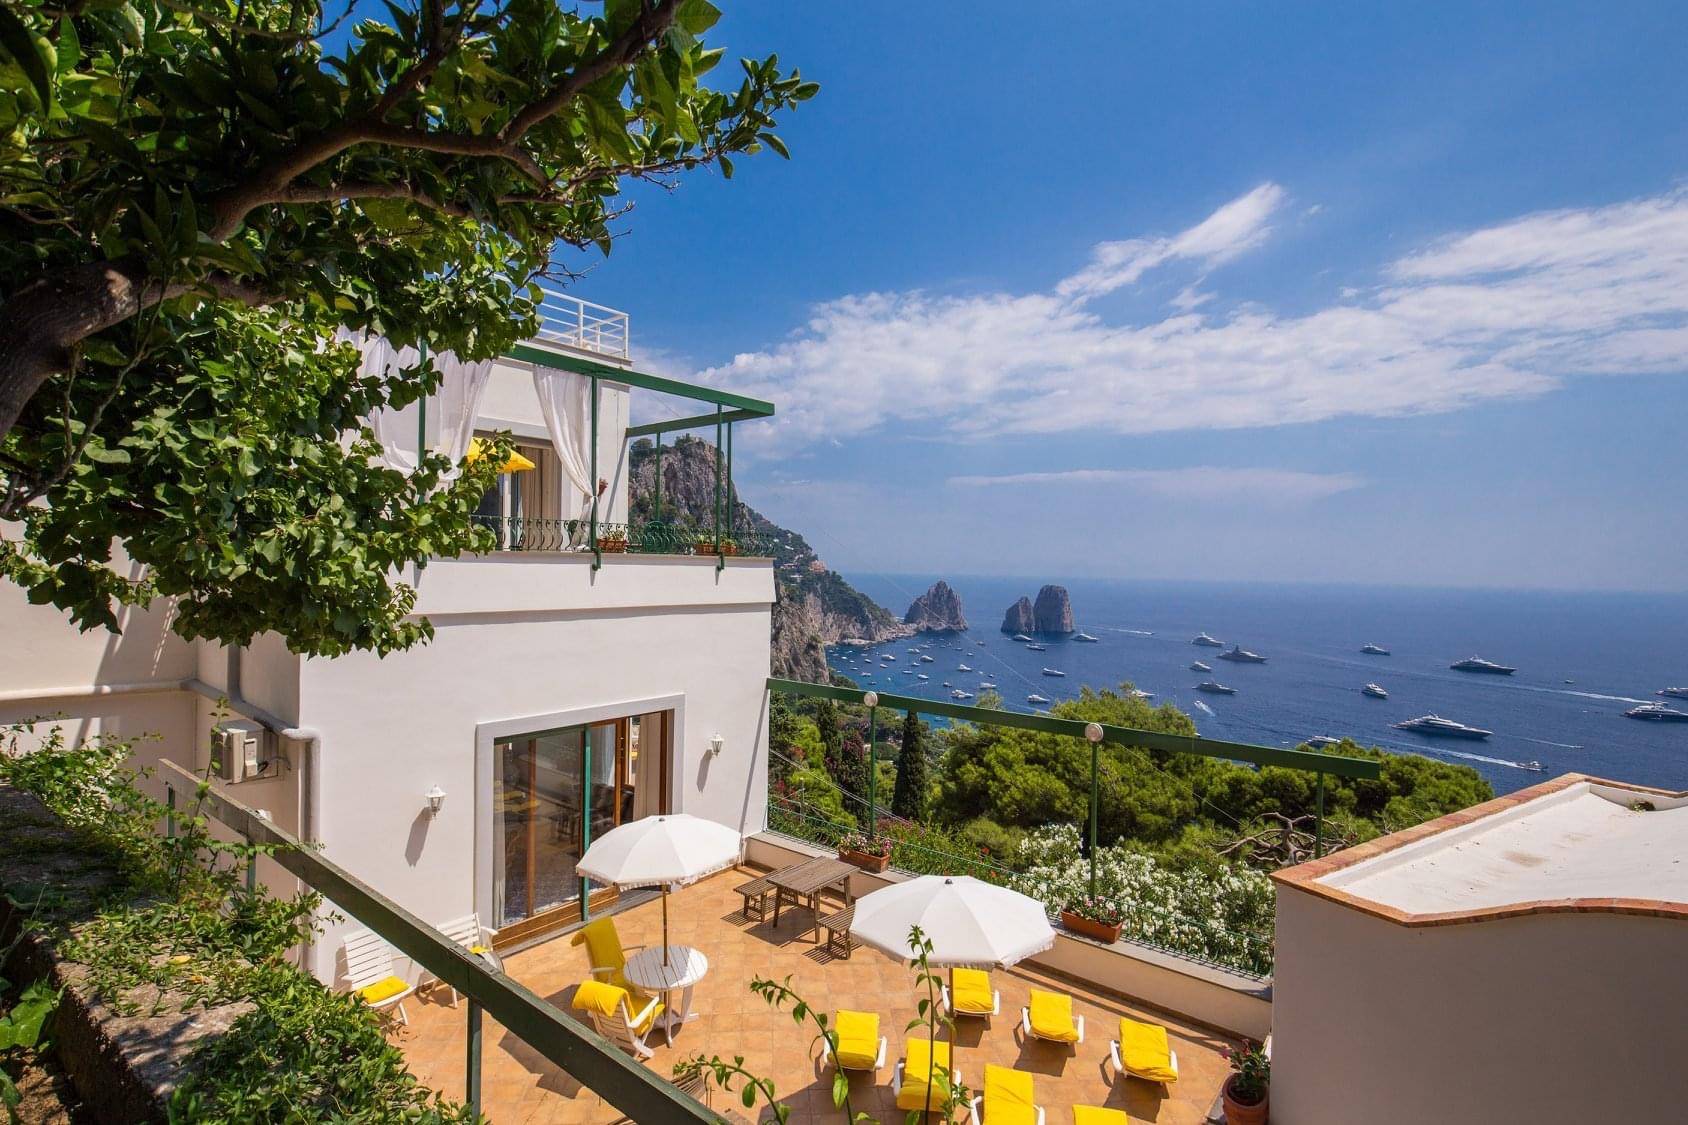 BOUTIQUE HOTEL WITH ASTONISHING VIEW IN CAPRI